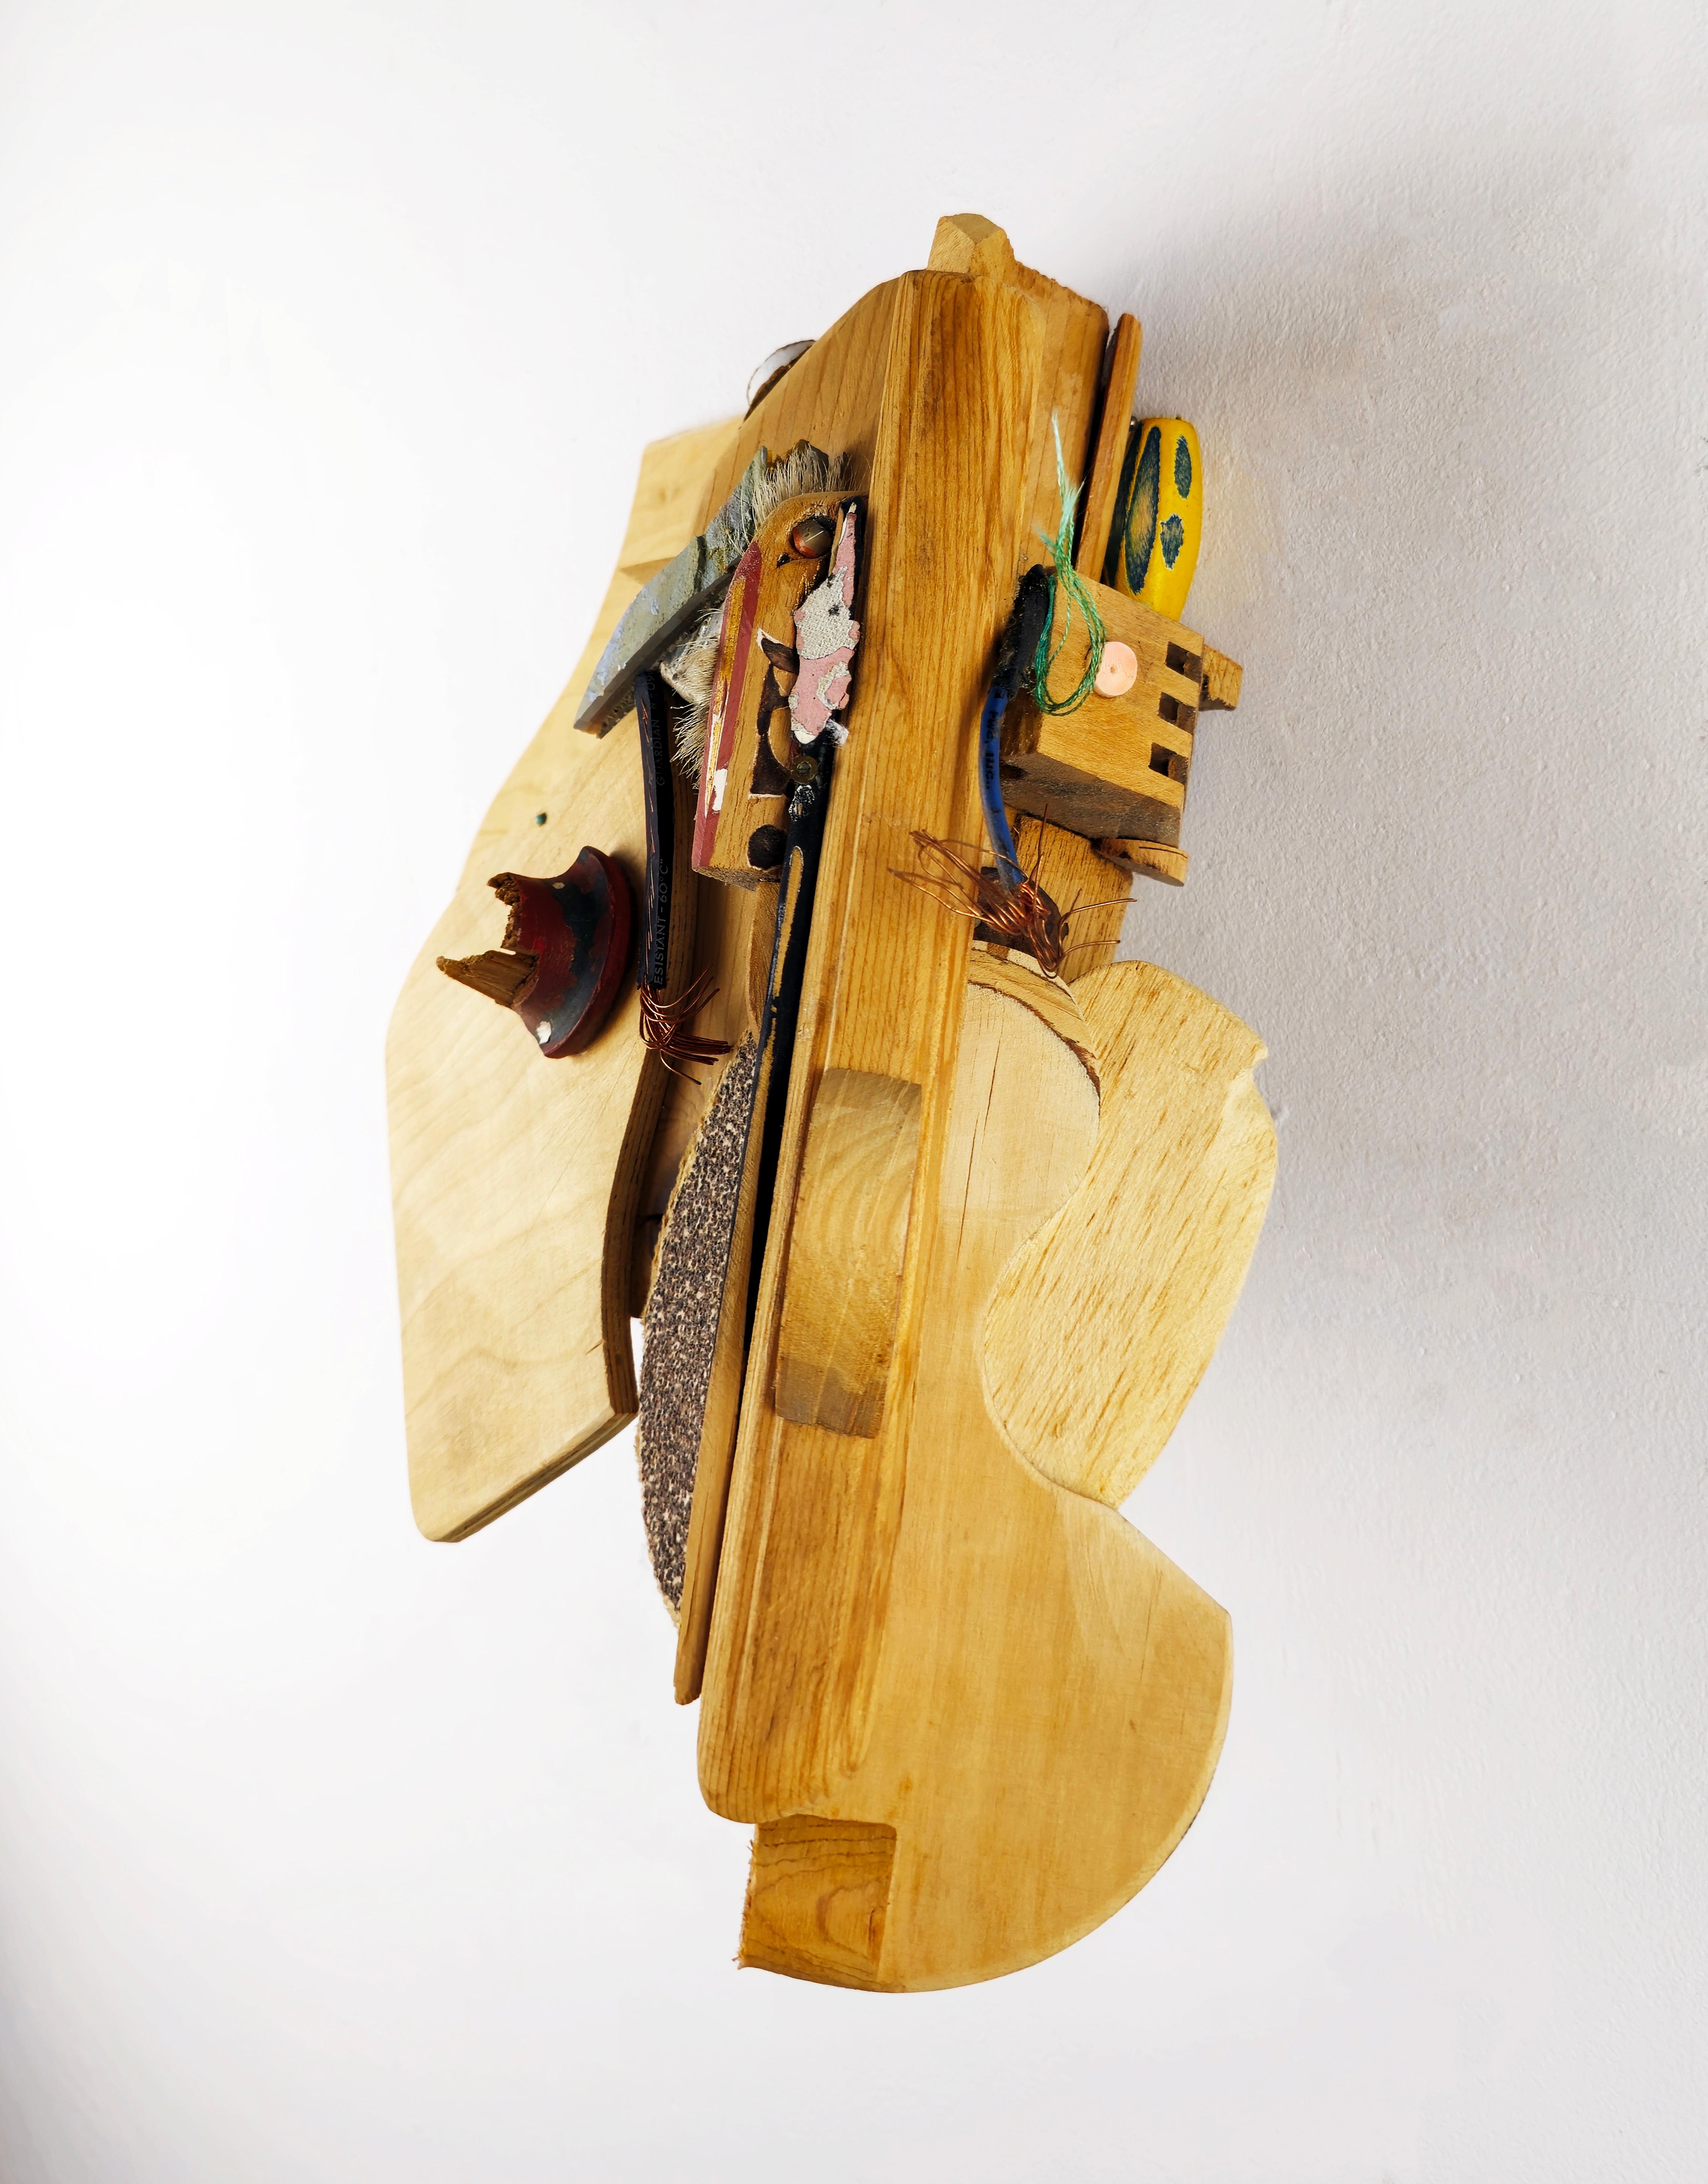 Linda Stein, Pacer 142 - Mixed Media Assemblage Contemporary Art Wall Sculpture

Pacer 142 is from artist Linda Stein's Brush Assemblage series, where she combines found objects, including brushes, to form wall sculptures.

Stein's works are in more